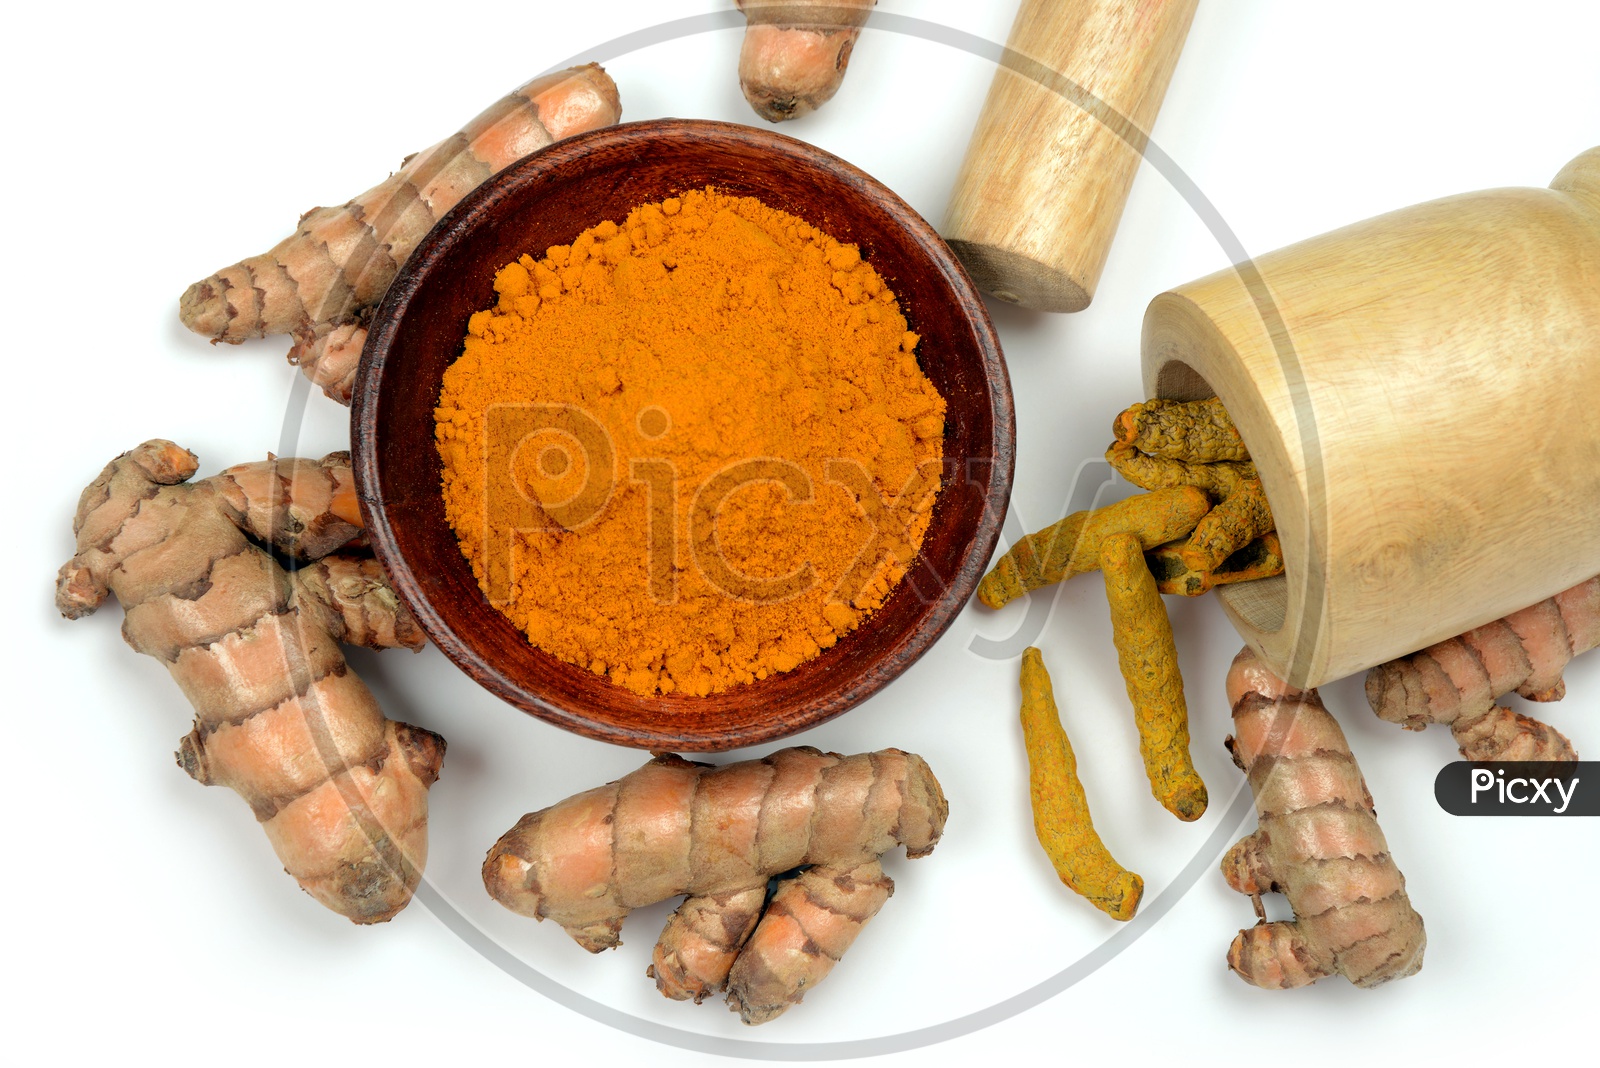 Organic Turmeric roots and Turmeric Powder in a bowl and wooden mortar, Indian spices